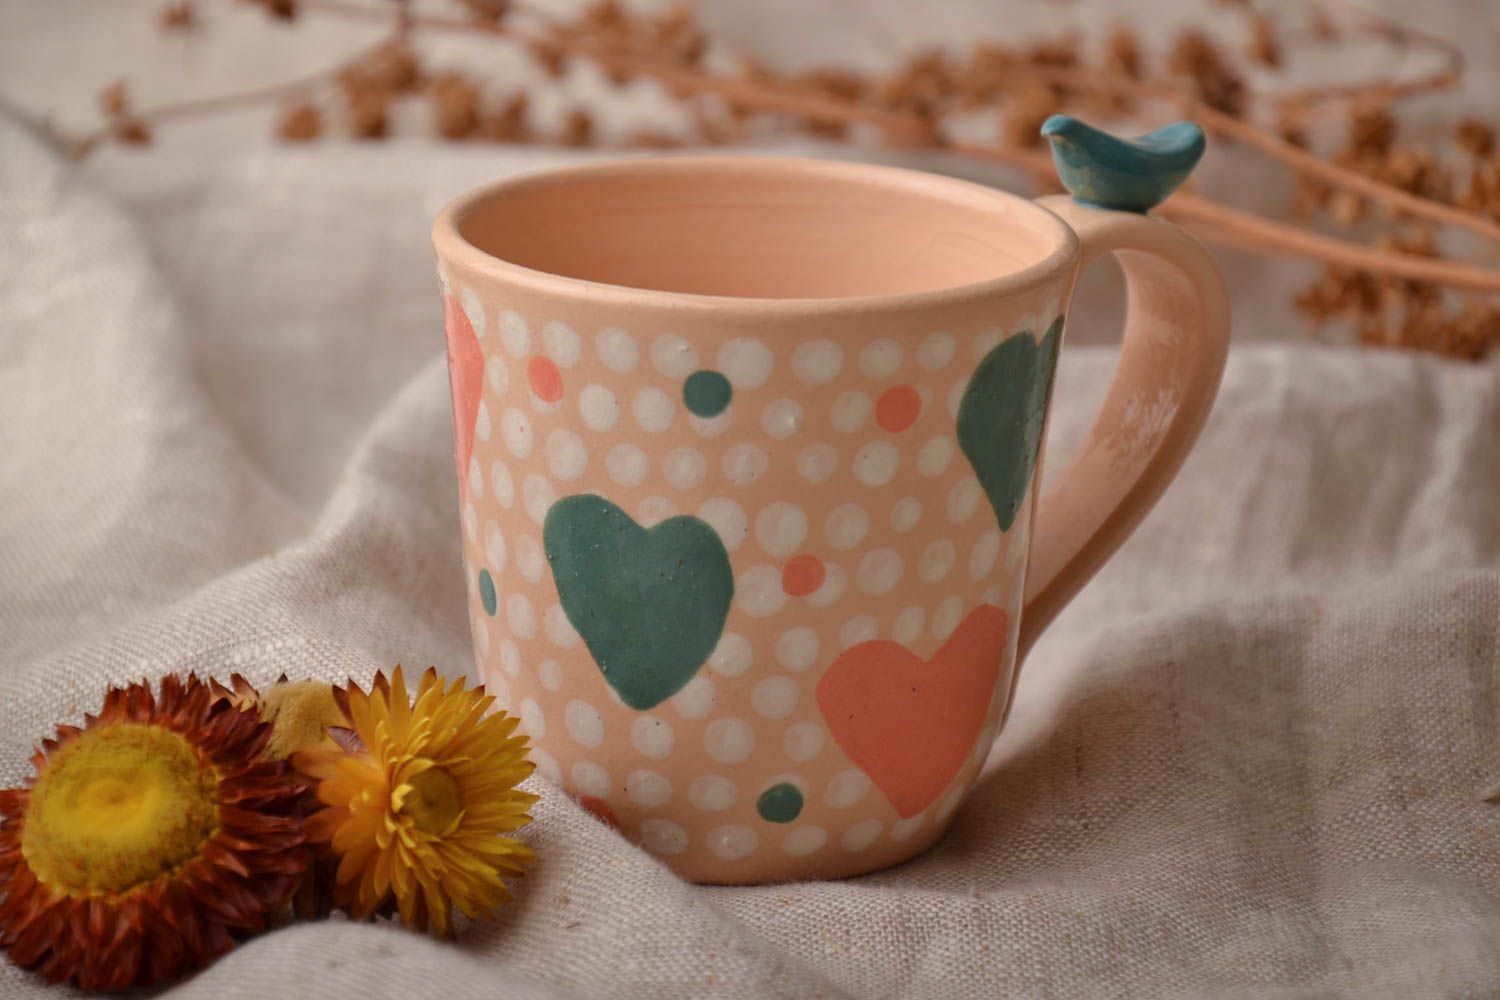 Peach color ceramic glazed teacup for a girl with a heart pattern photo 1